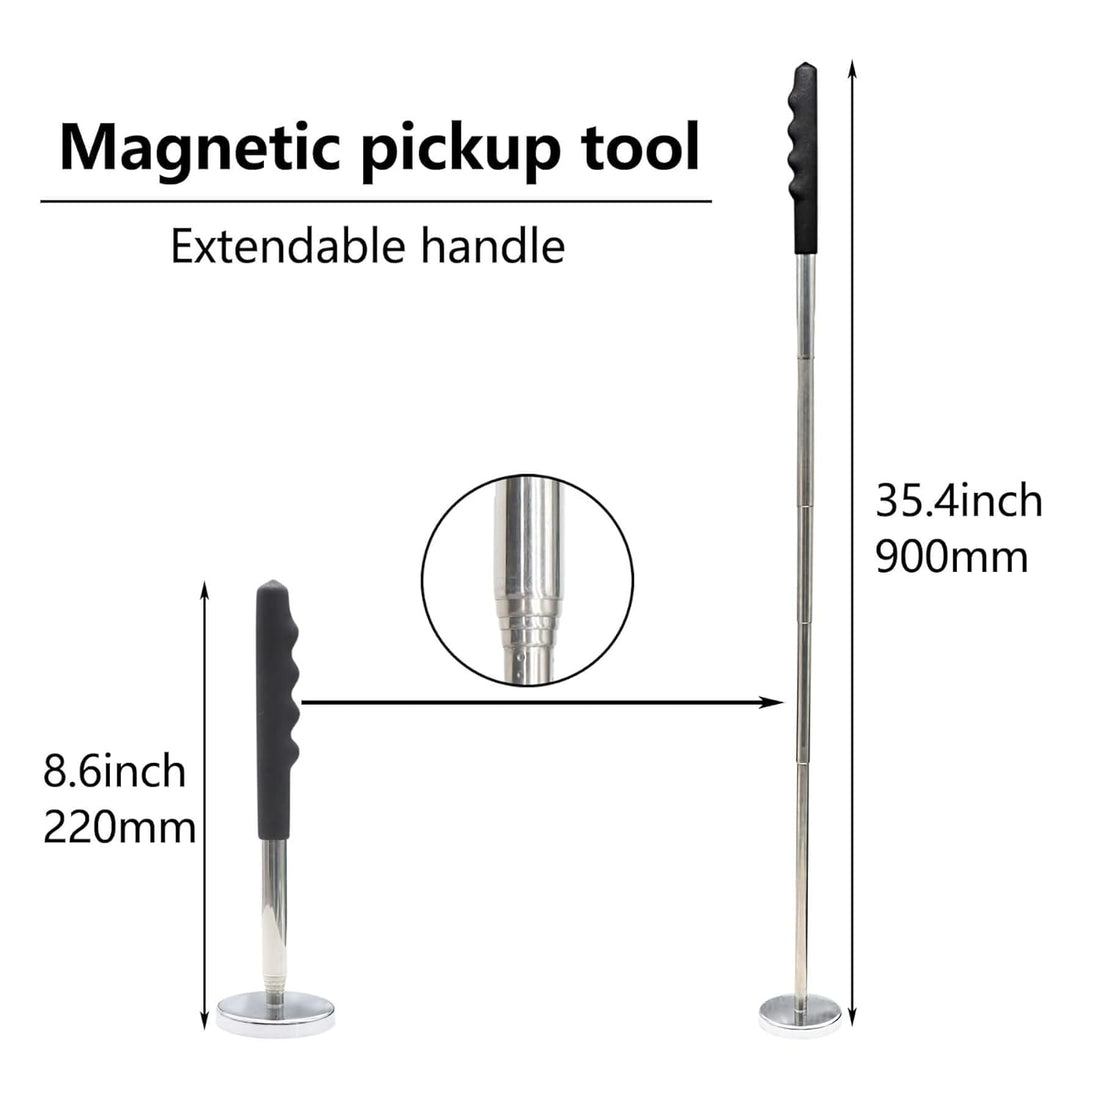 Evecad Magnetic Pickup Tool, Telescoping Magnet Sweeper, Screws Parts Finder with 18Lbs Magnetic Pull Capacity, Nail Magnet, Extendable Telescoping Magnetic Pickup Tool, Retractable from 8 to 34 inch